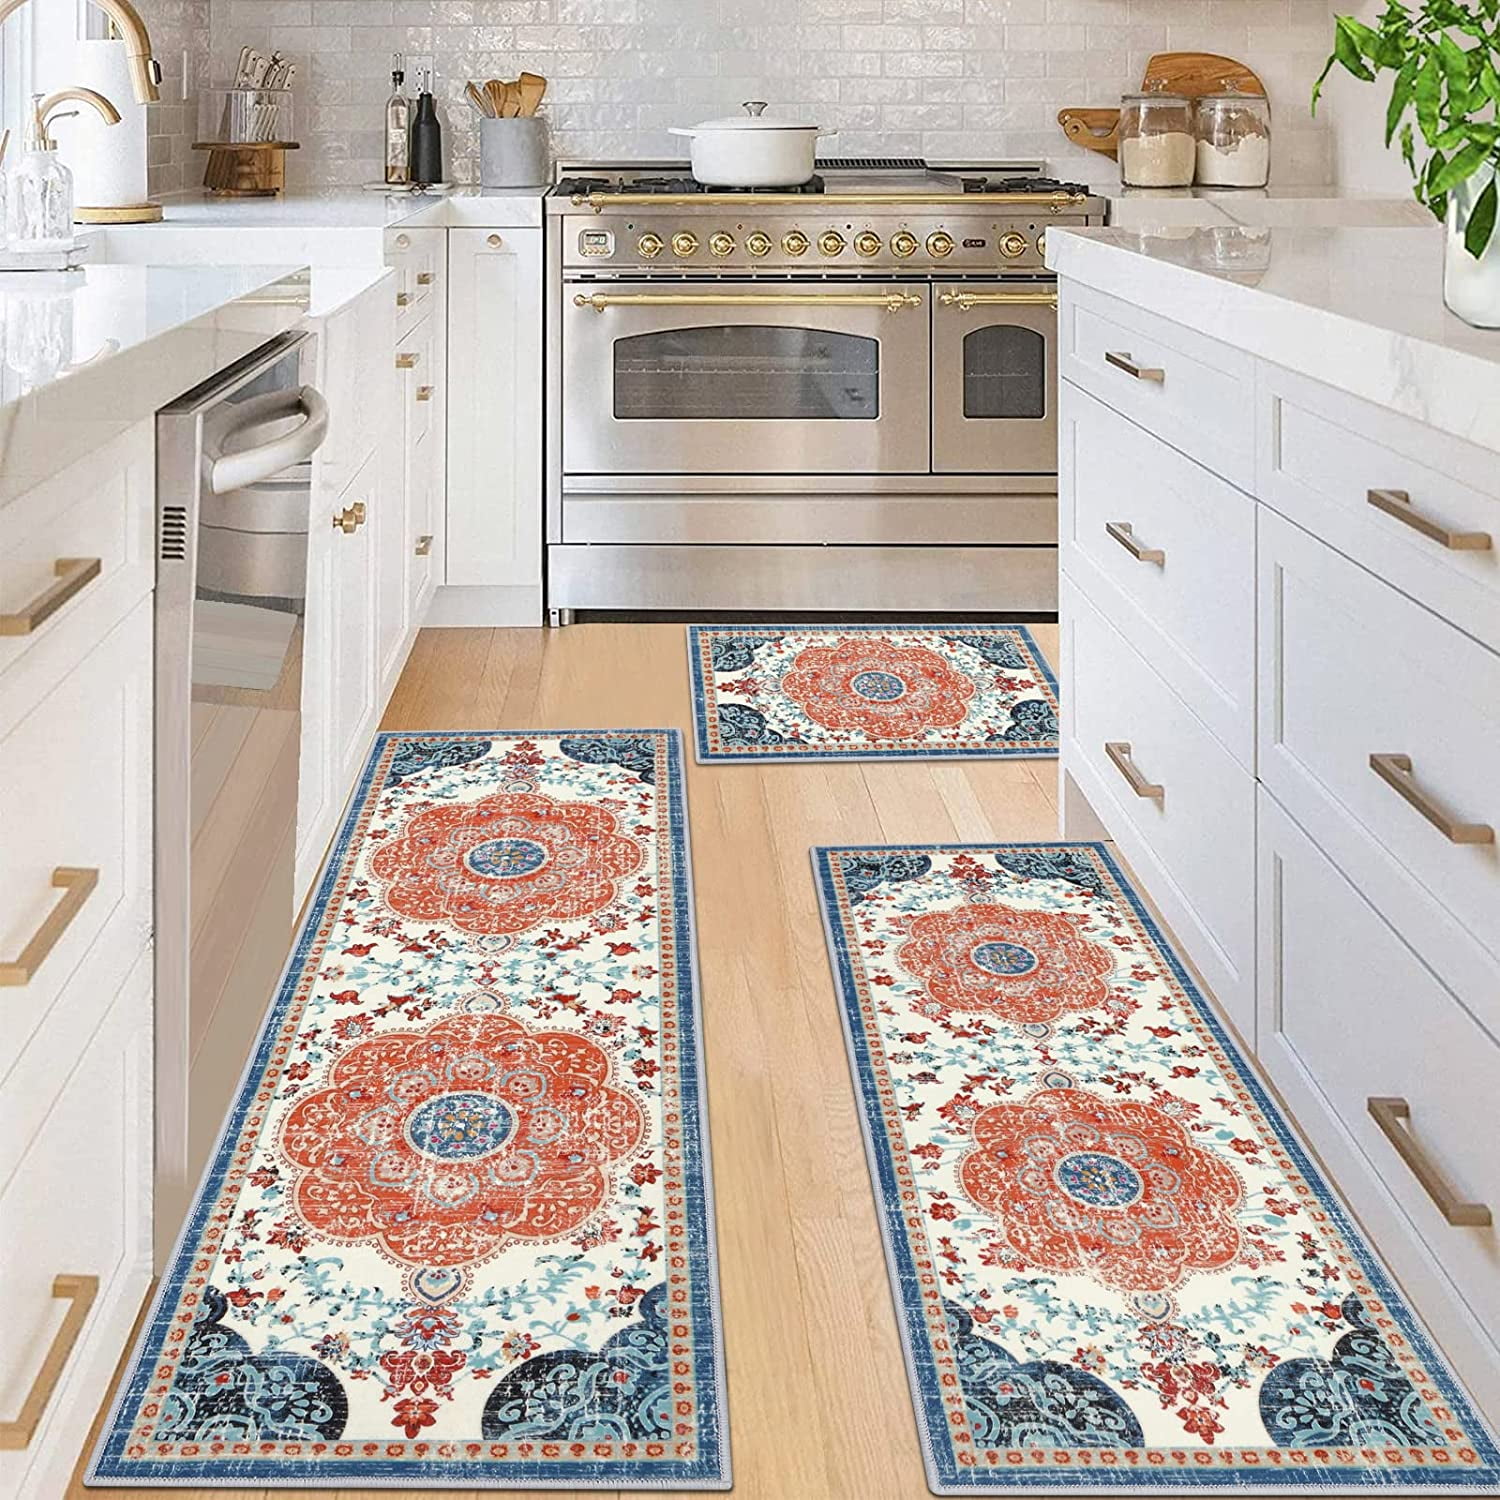 32 Best Kitchen Rug Ideas - Perfect Kitchen Rugs and Runners